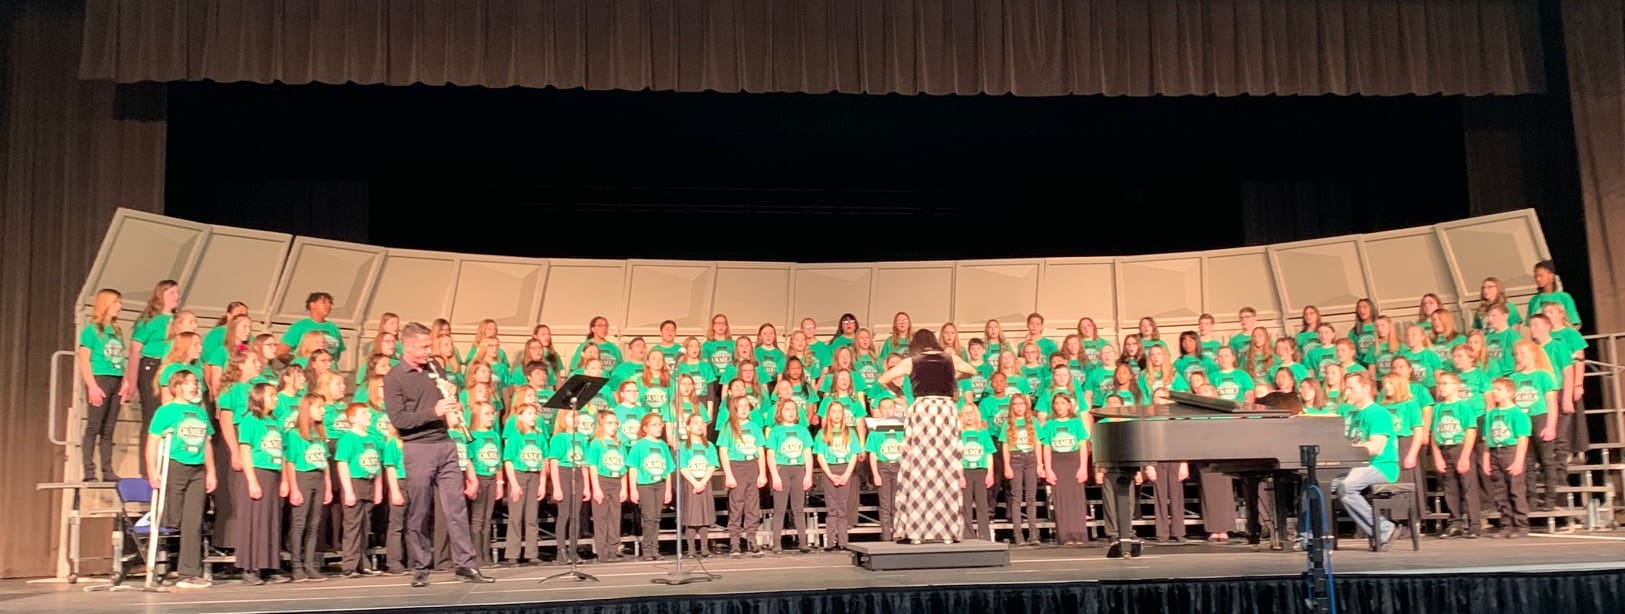 HENNESSEY CHOIR STUDENT PERFORMS IN TULSA